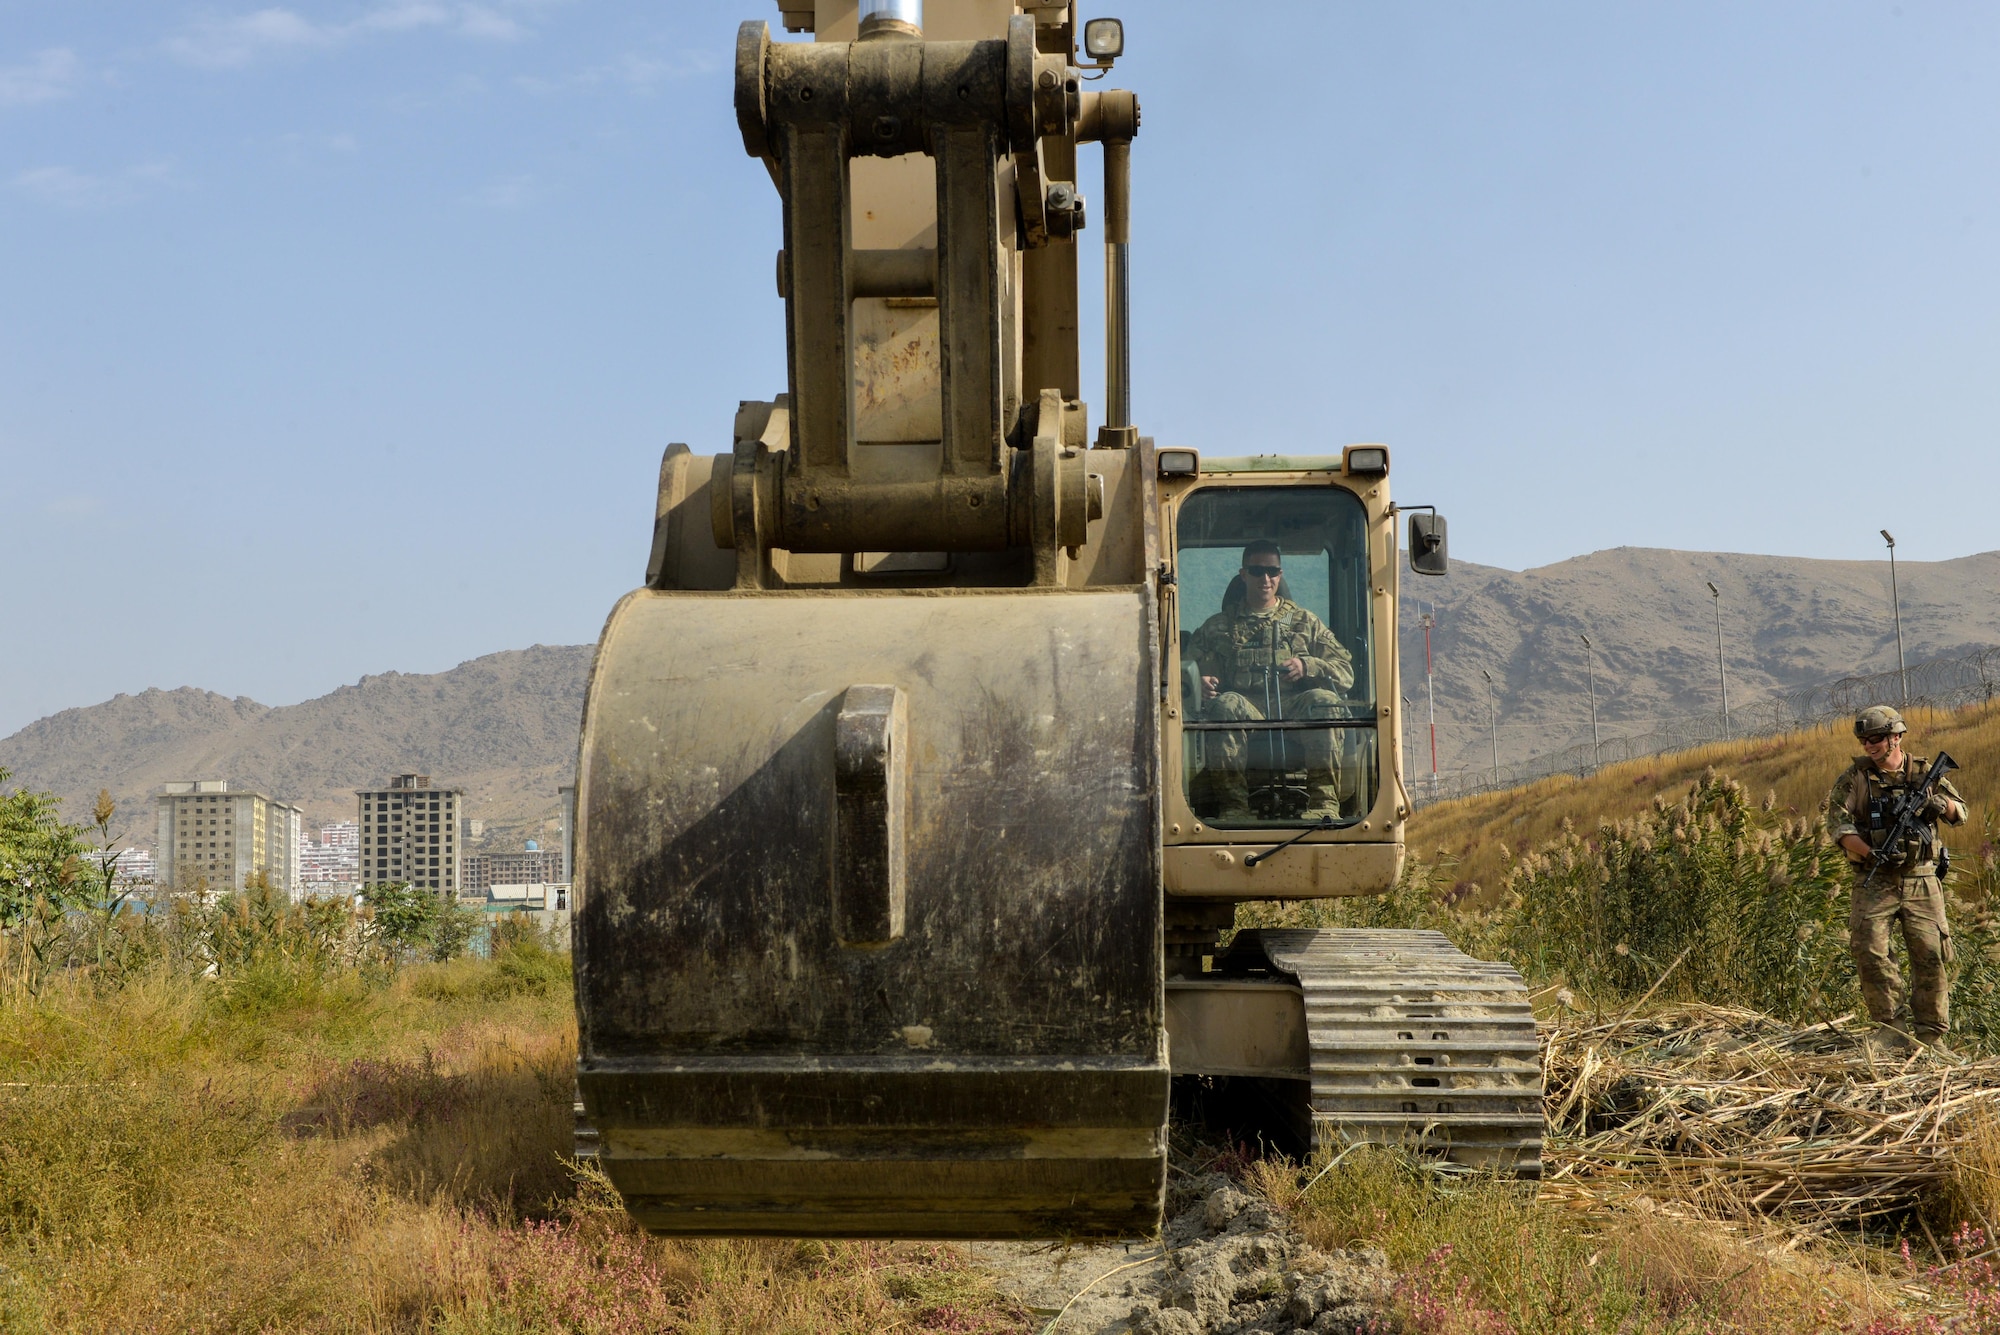 Master Sgt. Thomas Ryan, Train, Advise, Assist Command-Air (TAAC-Air) civil engineer advisor, starts an excavator before clearing reeds in a field at Kabul Air Wing, Afghanistan, Oct. 6, 2016. The excavator was loaned to TAAC-Air by the Afghan Air Force civil engineer squadron so that the area could be cleared of reeds that were preventing security forces members manning an entry control point from having a clear view of their surrounding area. (U.S. Air Force photo by Tech. Sgt. Christopher Holmes)